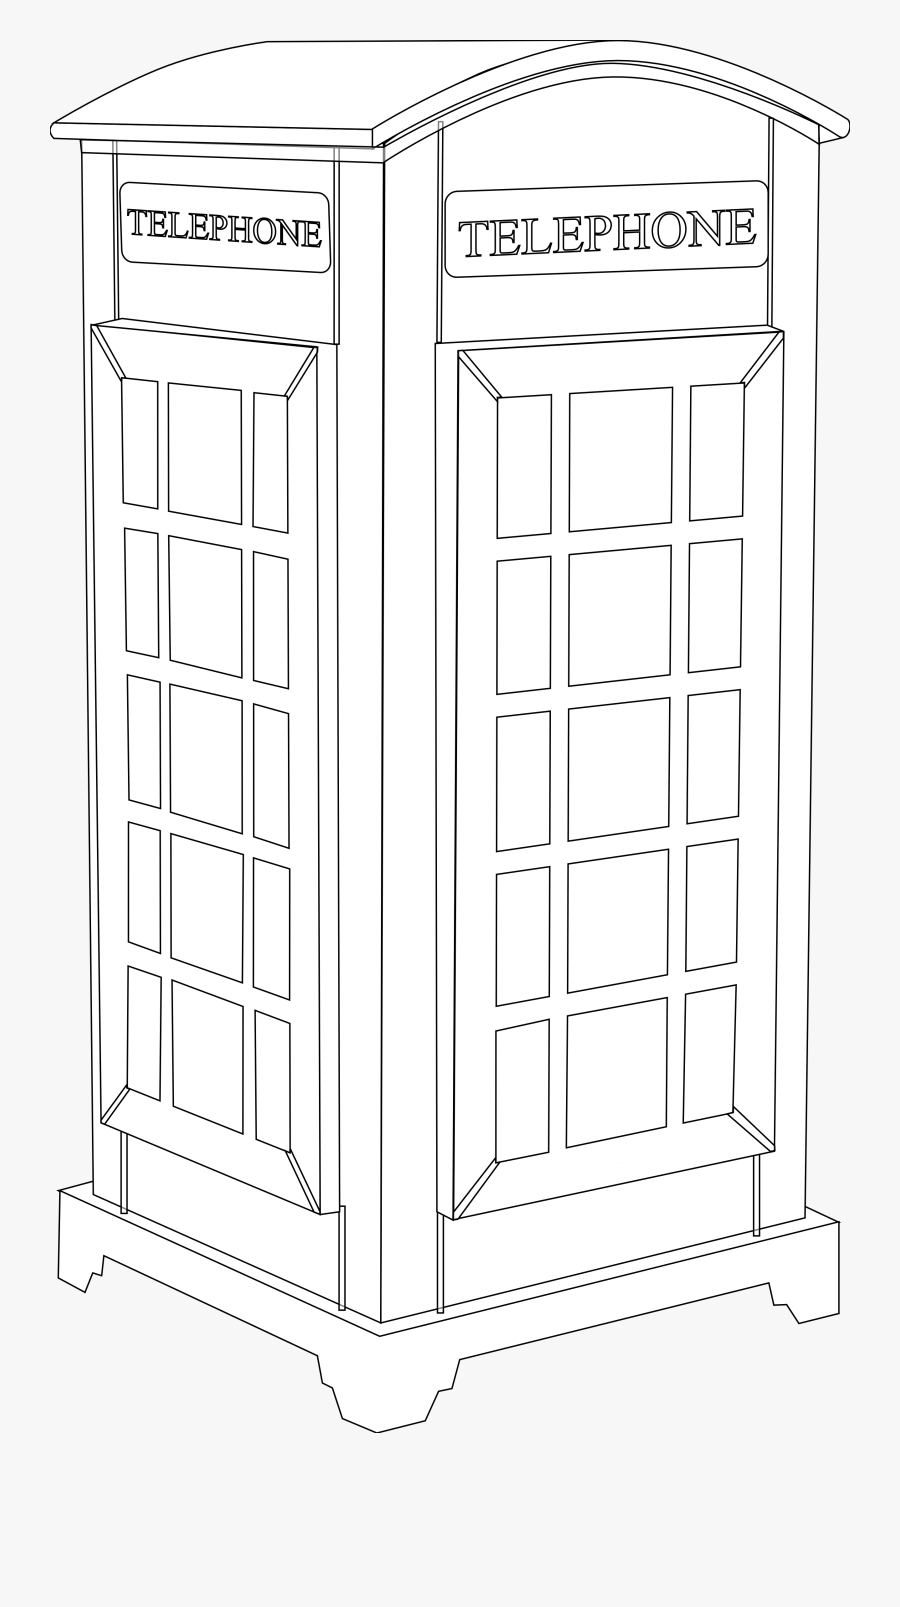 Phone Booth Clipart - Telephone Booth Clipart Black And White, Transparent Clipart